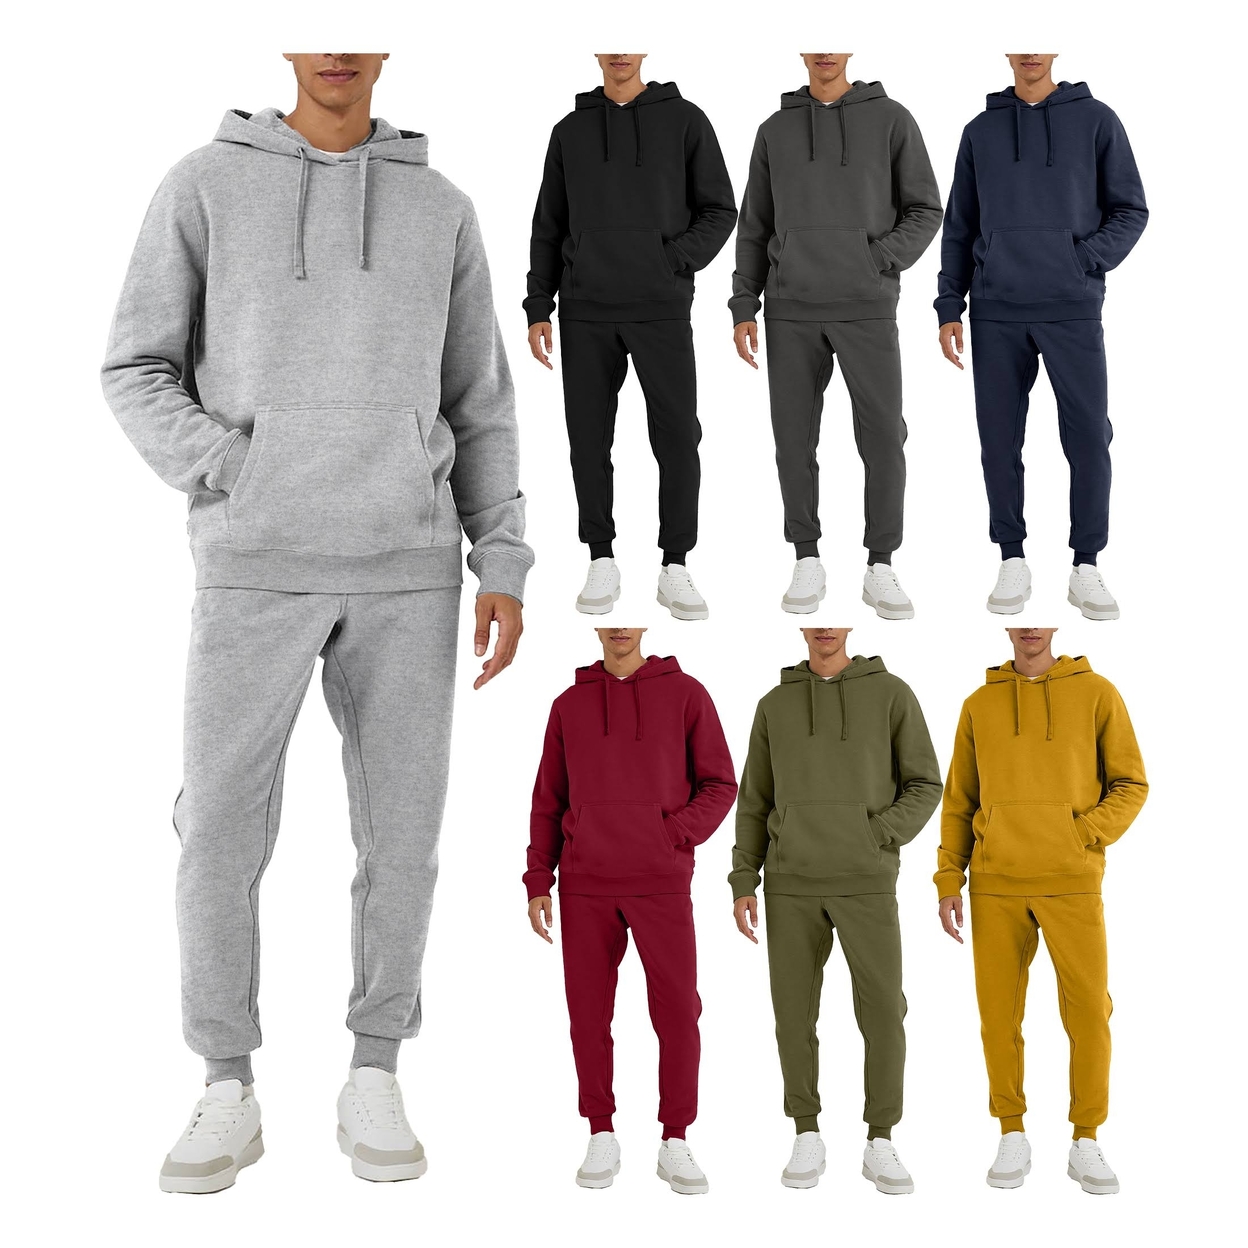 Men's Big & Tall Athletic Active Jogging Winter Warm Fleece Lined Pullover Tracksuit Set - Grey, X-large